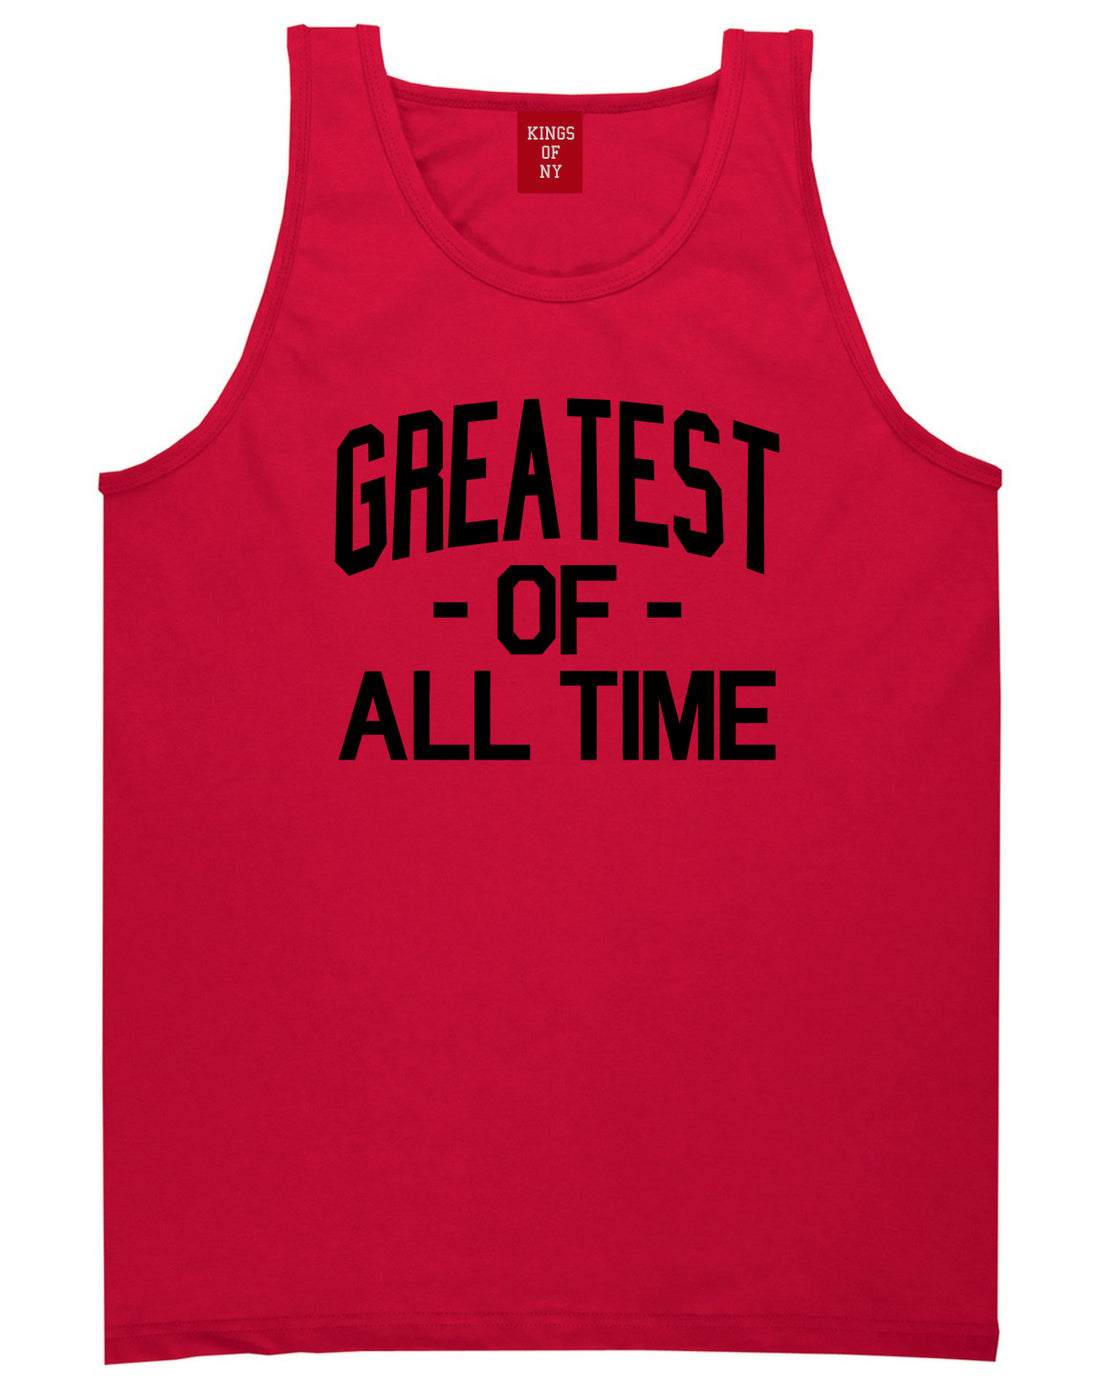 Greatest Of All Time GOAT Mens Tank Top Shirt Red by Kings Of NY